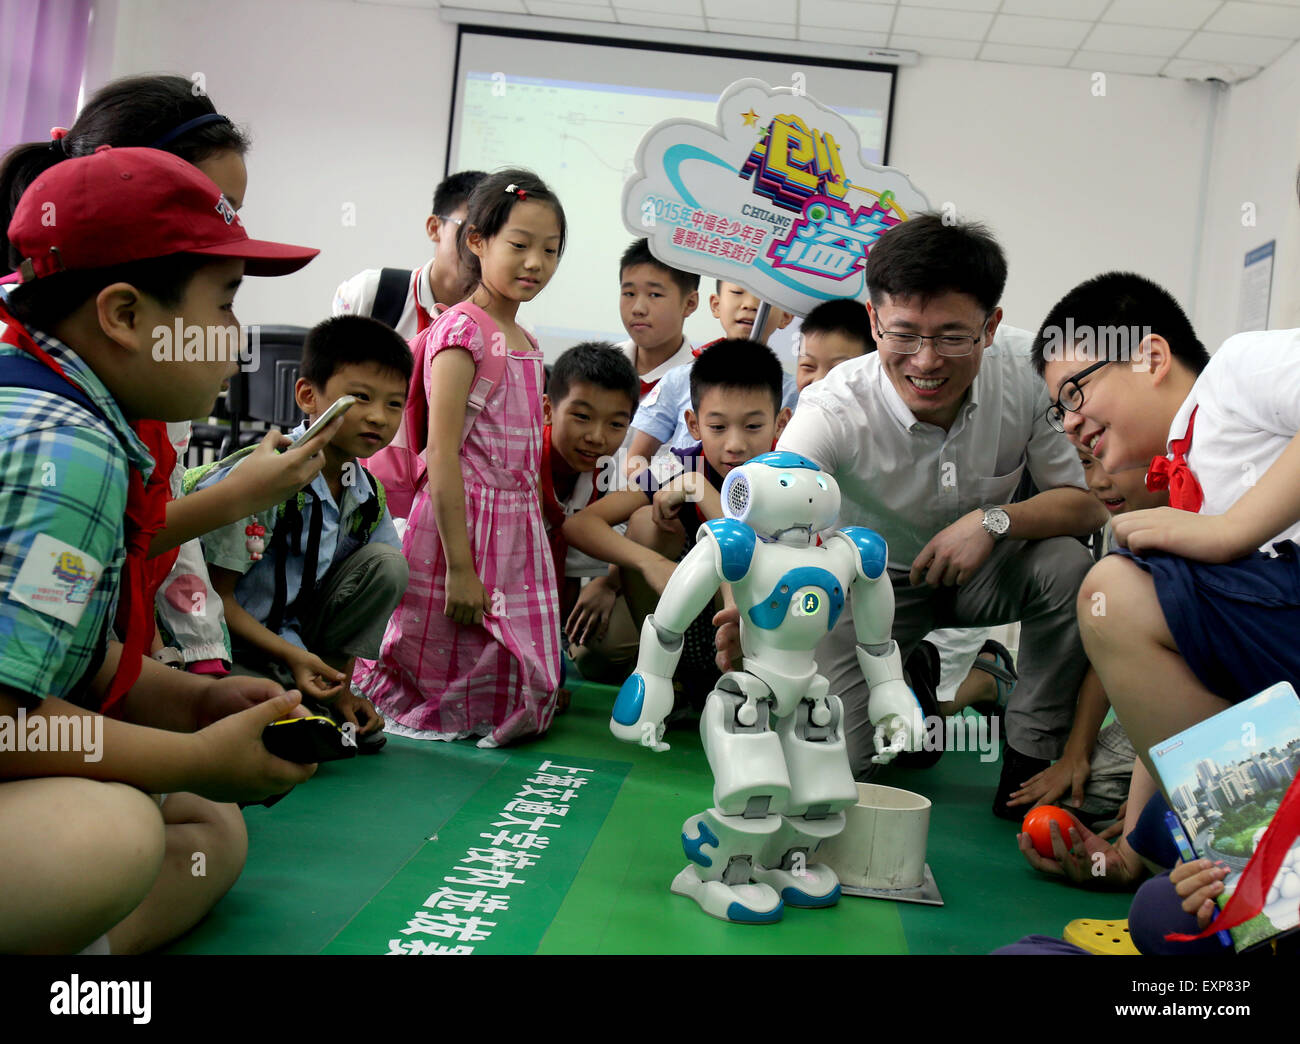 Shanghai, China. 16th July, 2015. Professor Leng Chuntao introduces Robot Nao to children interested in scientific invention at a robot laboratory in Shanghai Jiaotong University, east China, July 16, 2015. Nao is a 58-centimeter tall robot developed and manufactured by Aldebaran Robotics, a Paris-based company. Credit:  Liu Ying/Xinhua/Alamy Live News Stock Photo